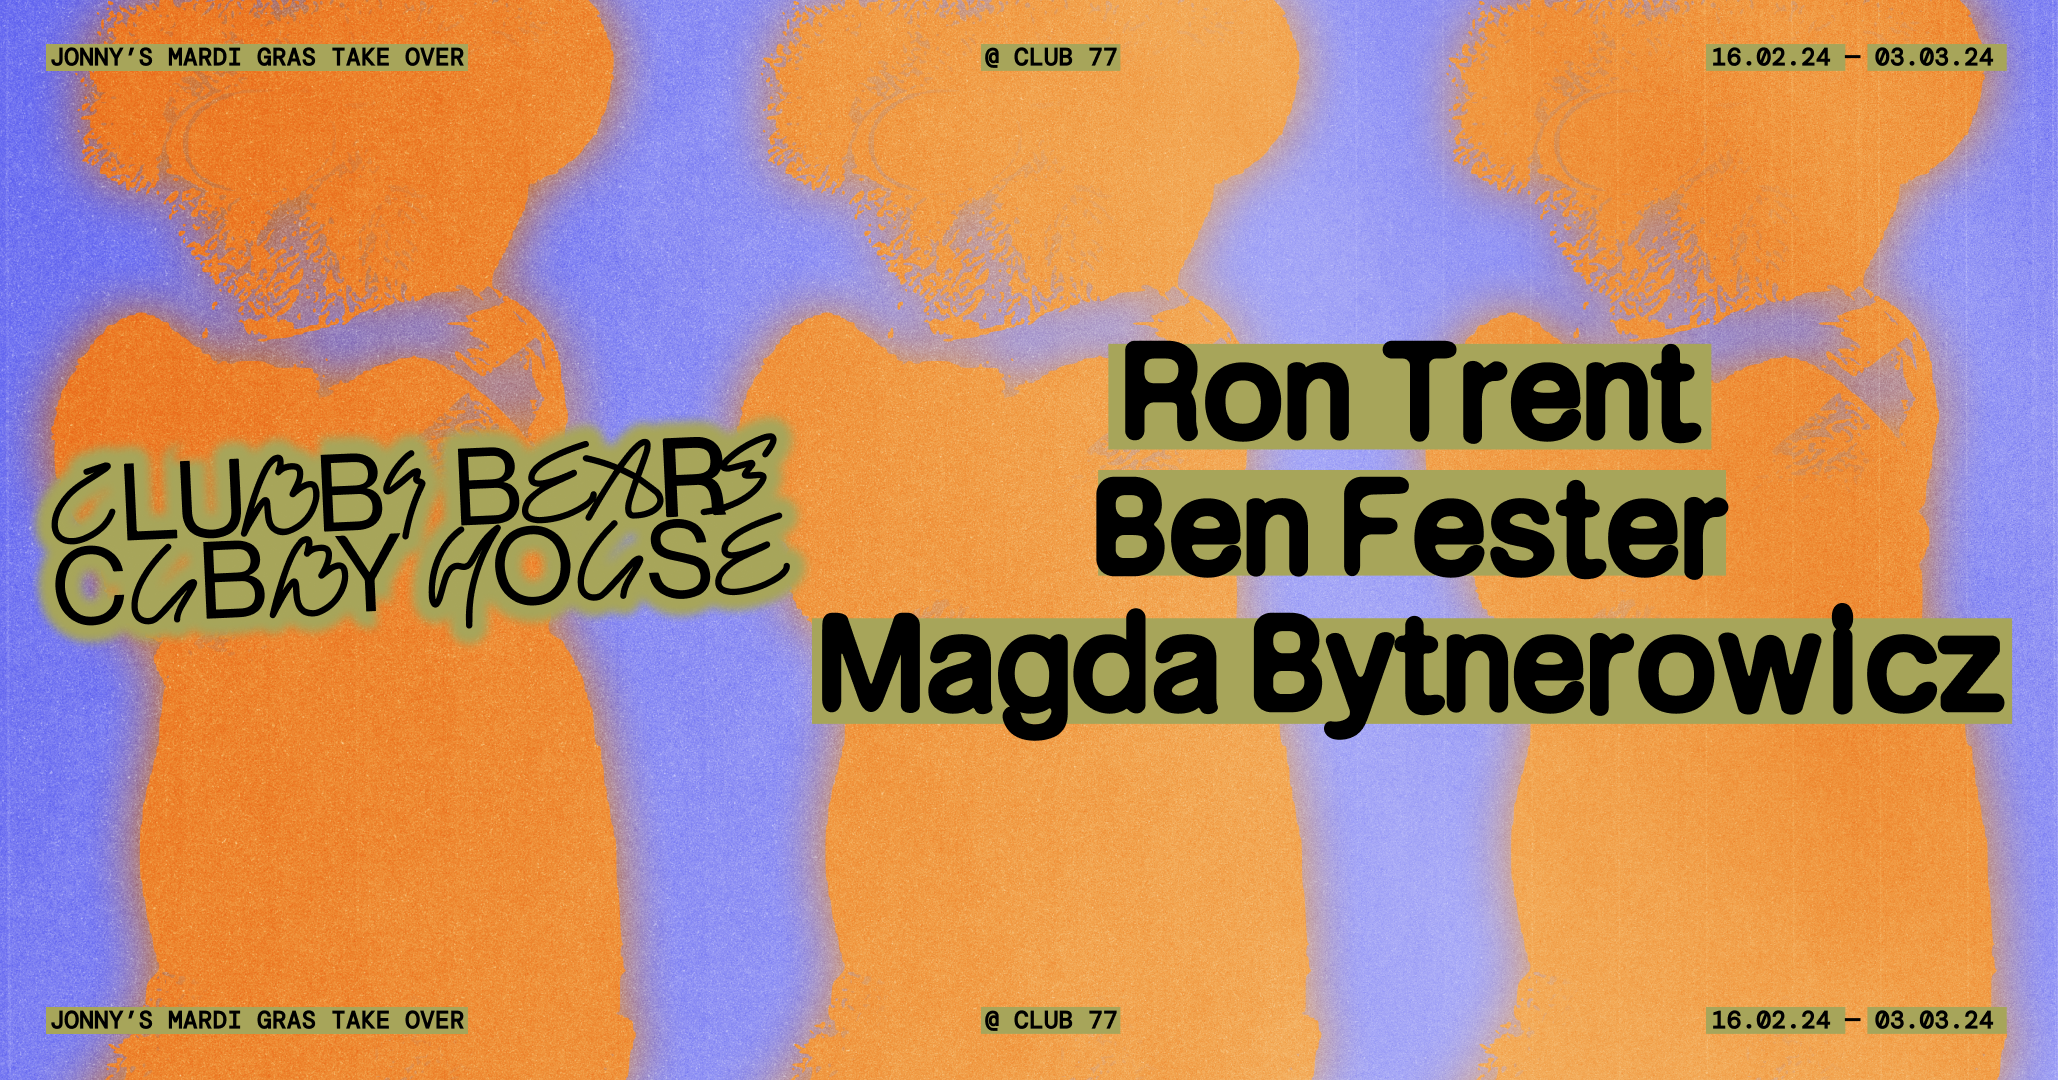 Clubby Bears Cubby House with Ron Trent, Ben Fester & Magda Bytnerowicz - Página frontal